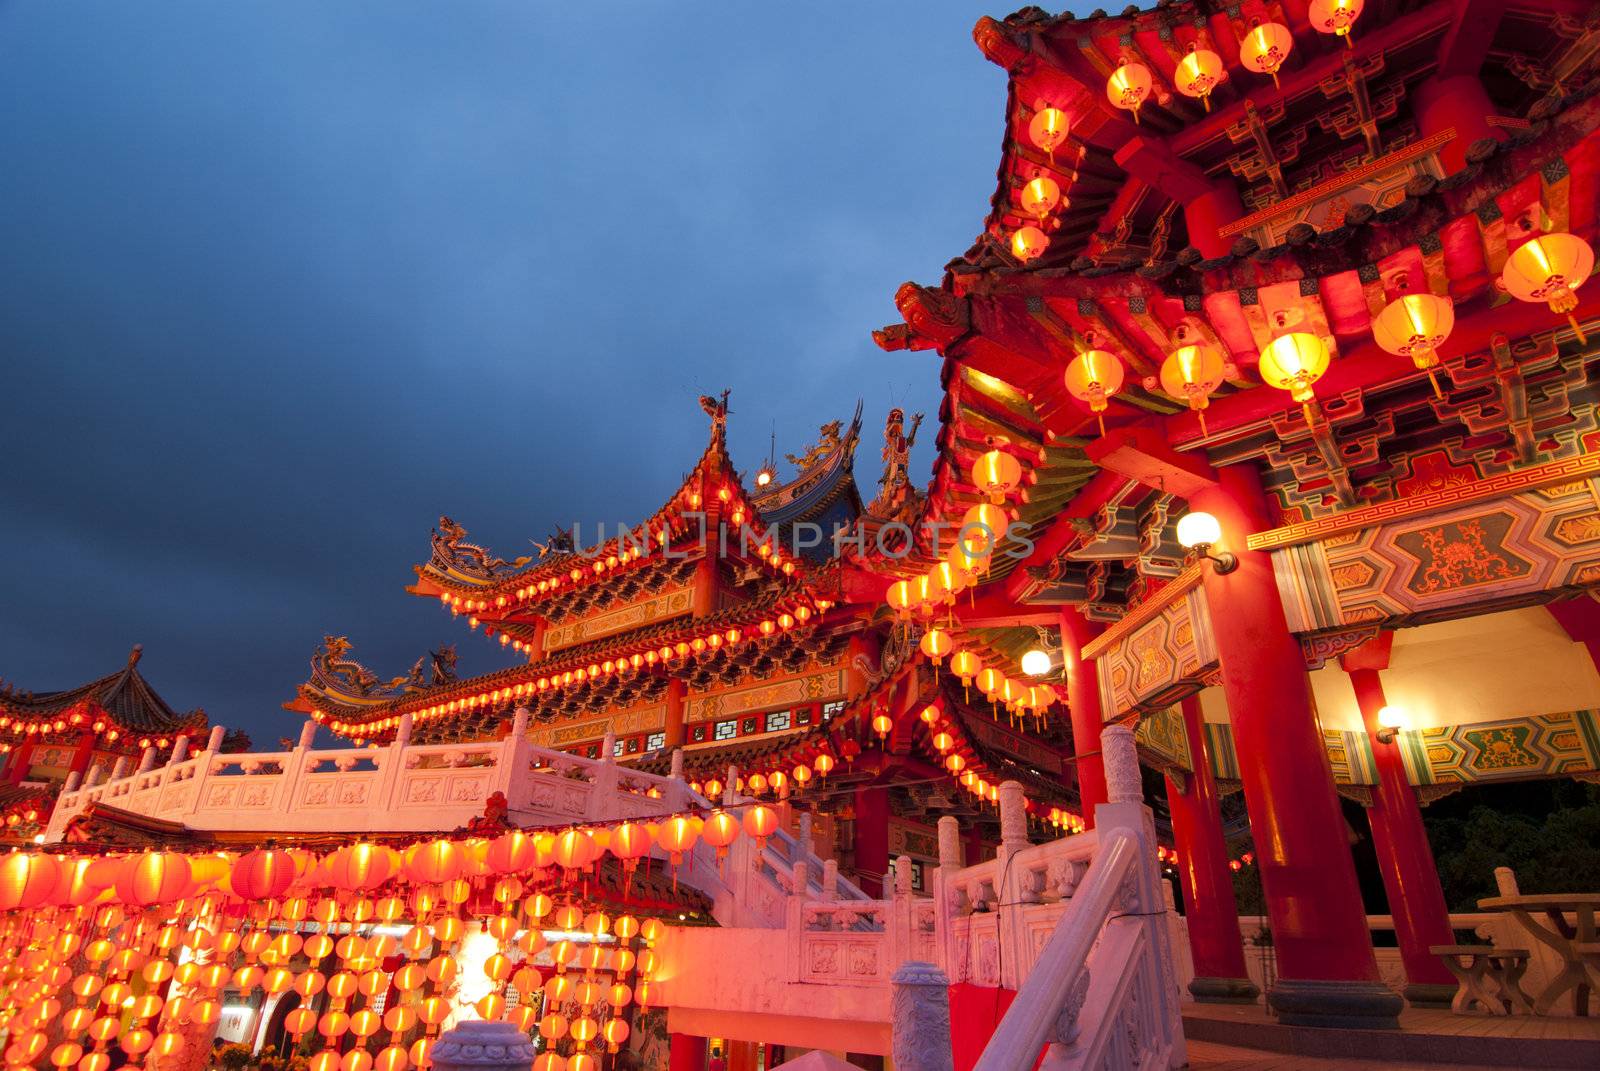 famous thean hou temple in malaysia during chinese new year cele by yuliang11